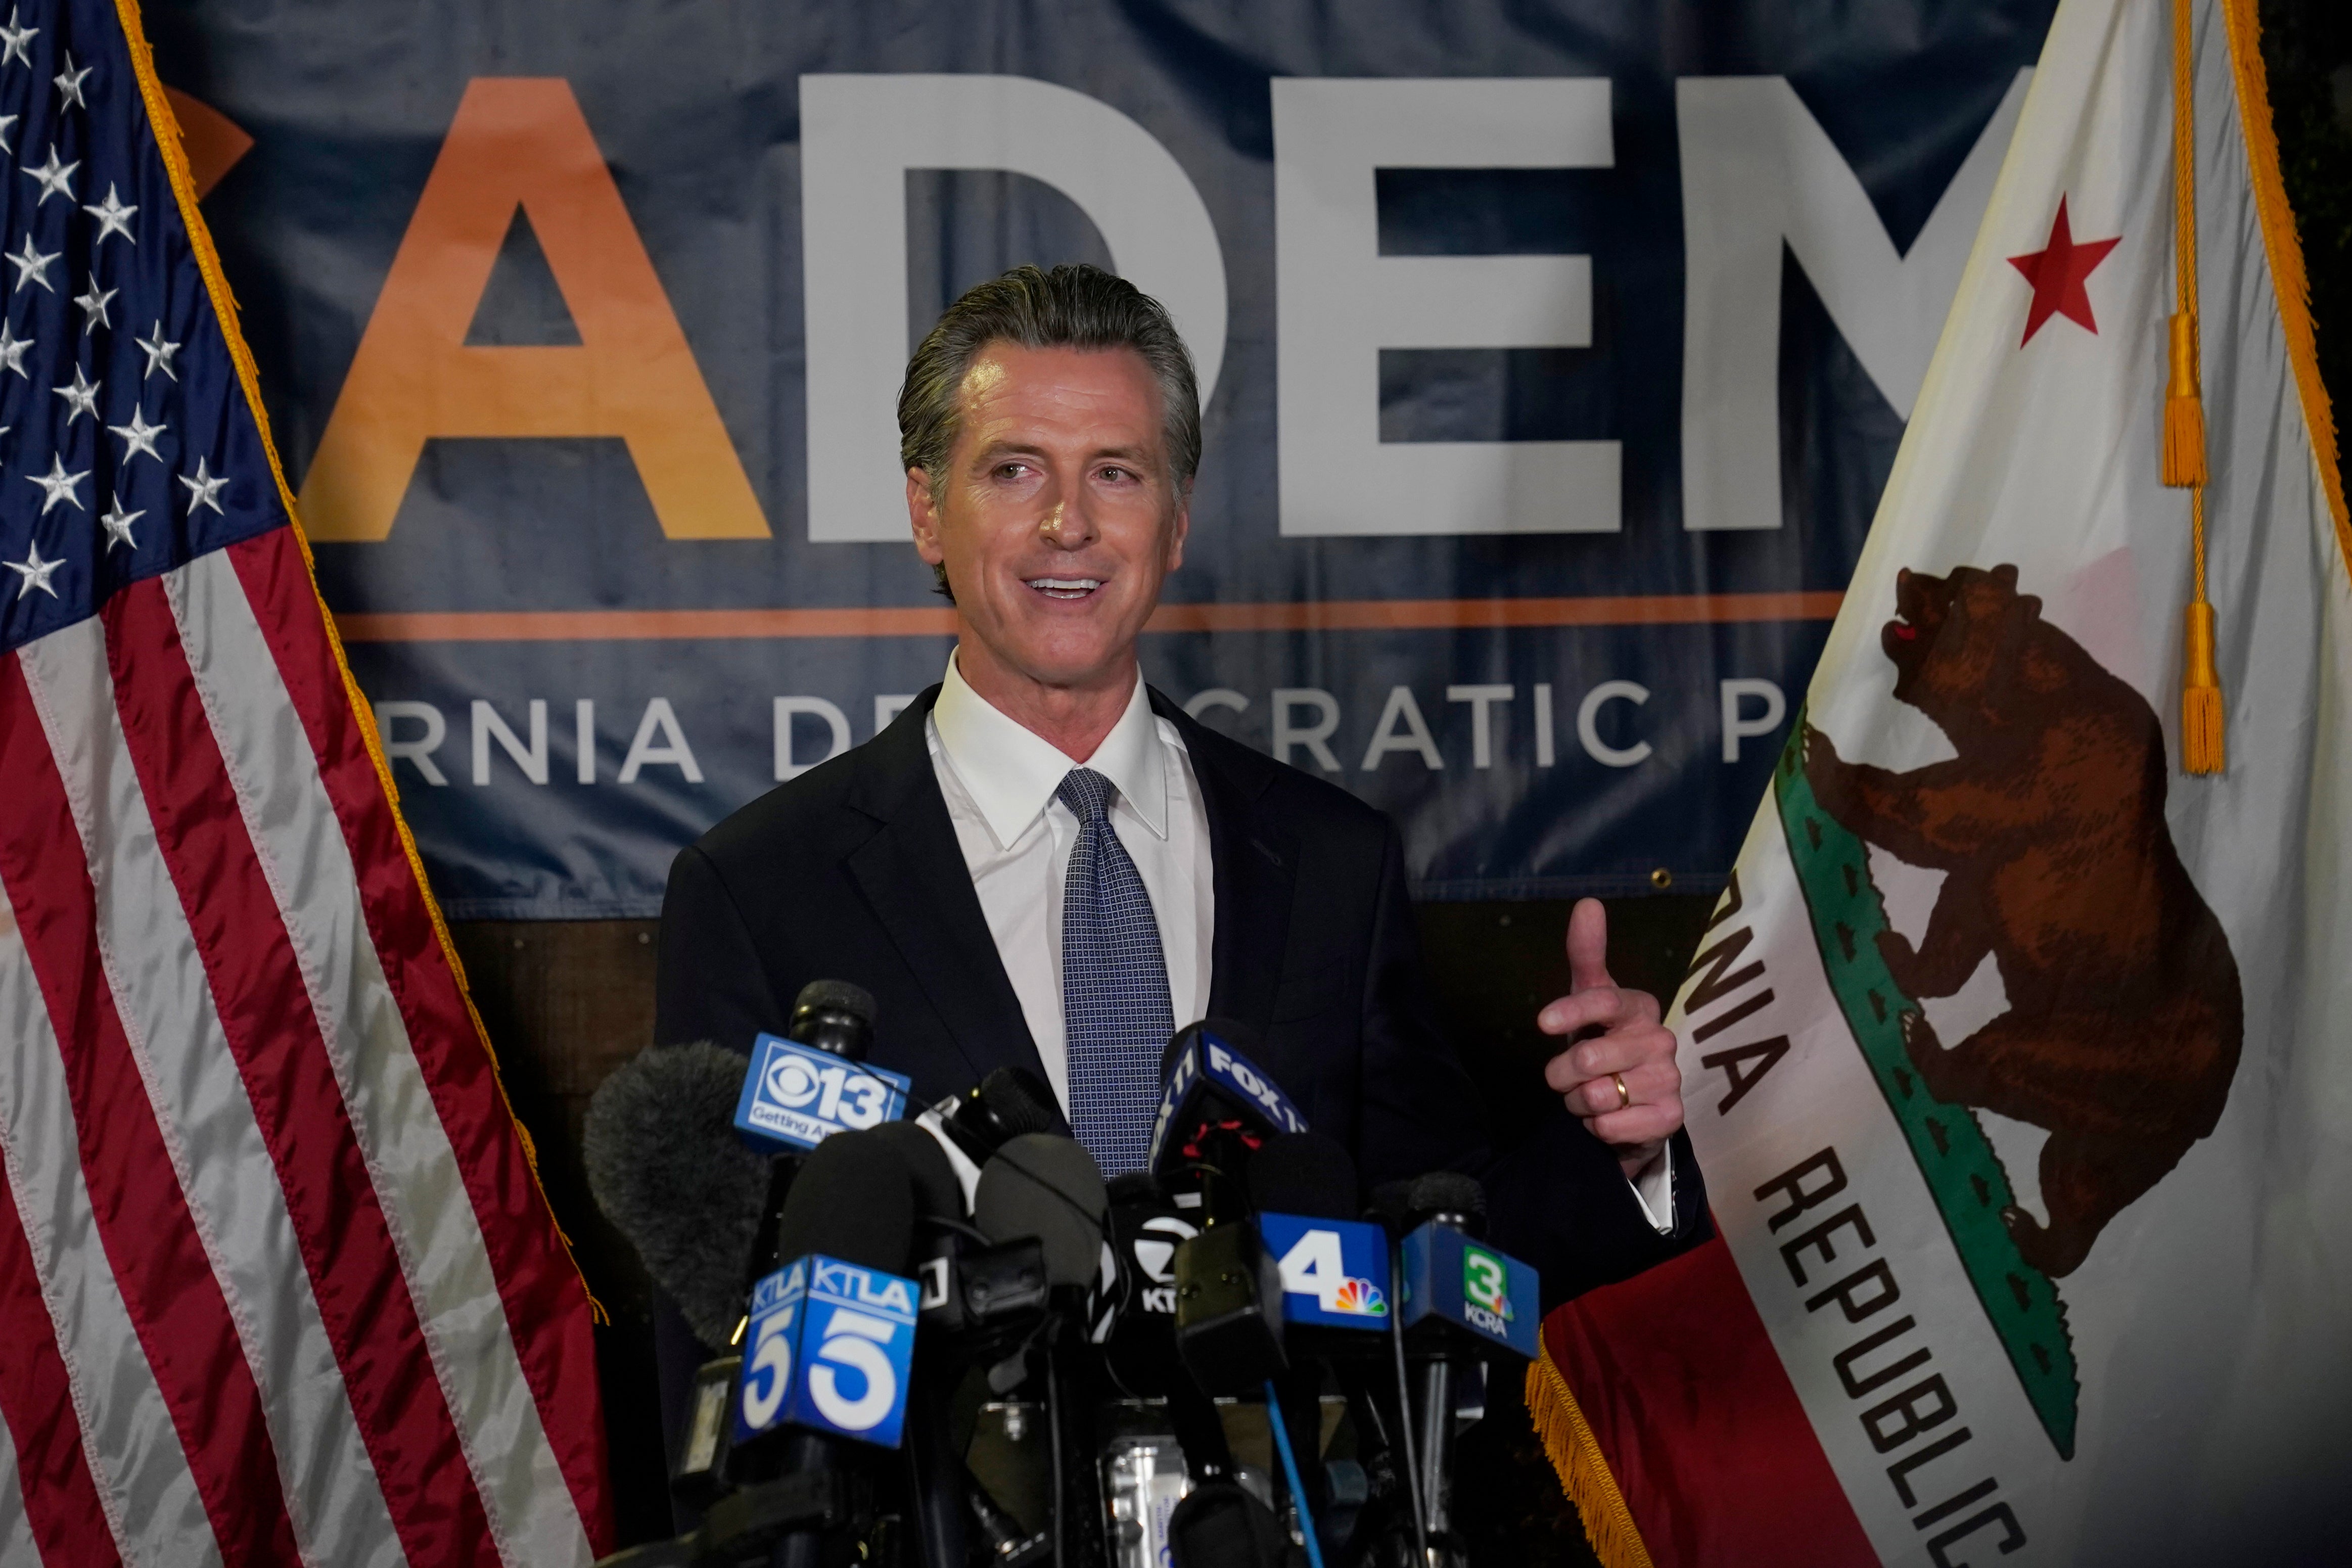 A victorious Newsom talks to reporters at the state’s Democrat HQ in Sacramento on Tuesday